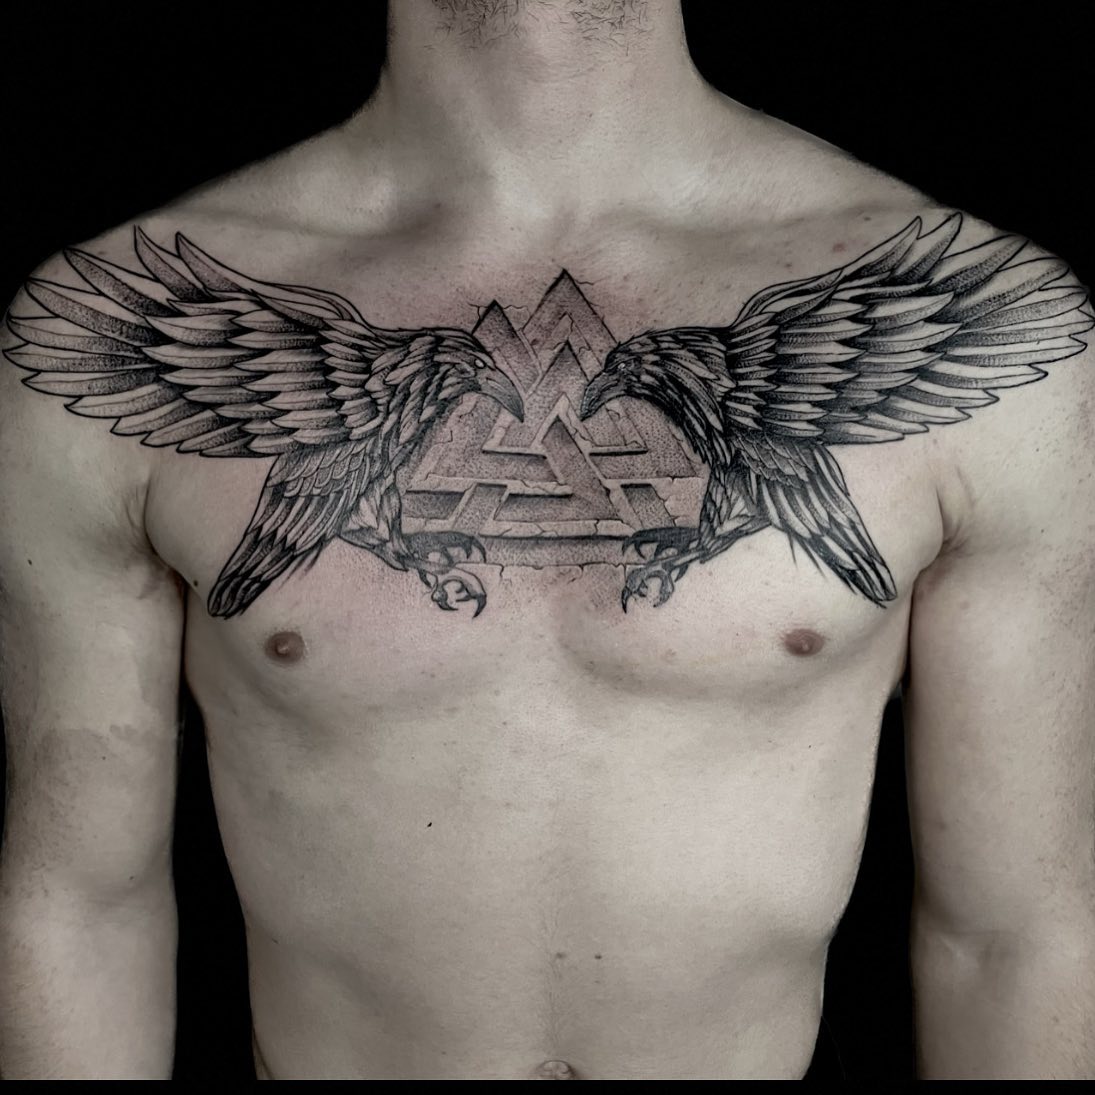 Two Ravens Tattoo on Chest